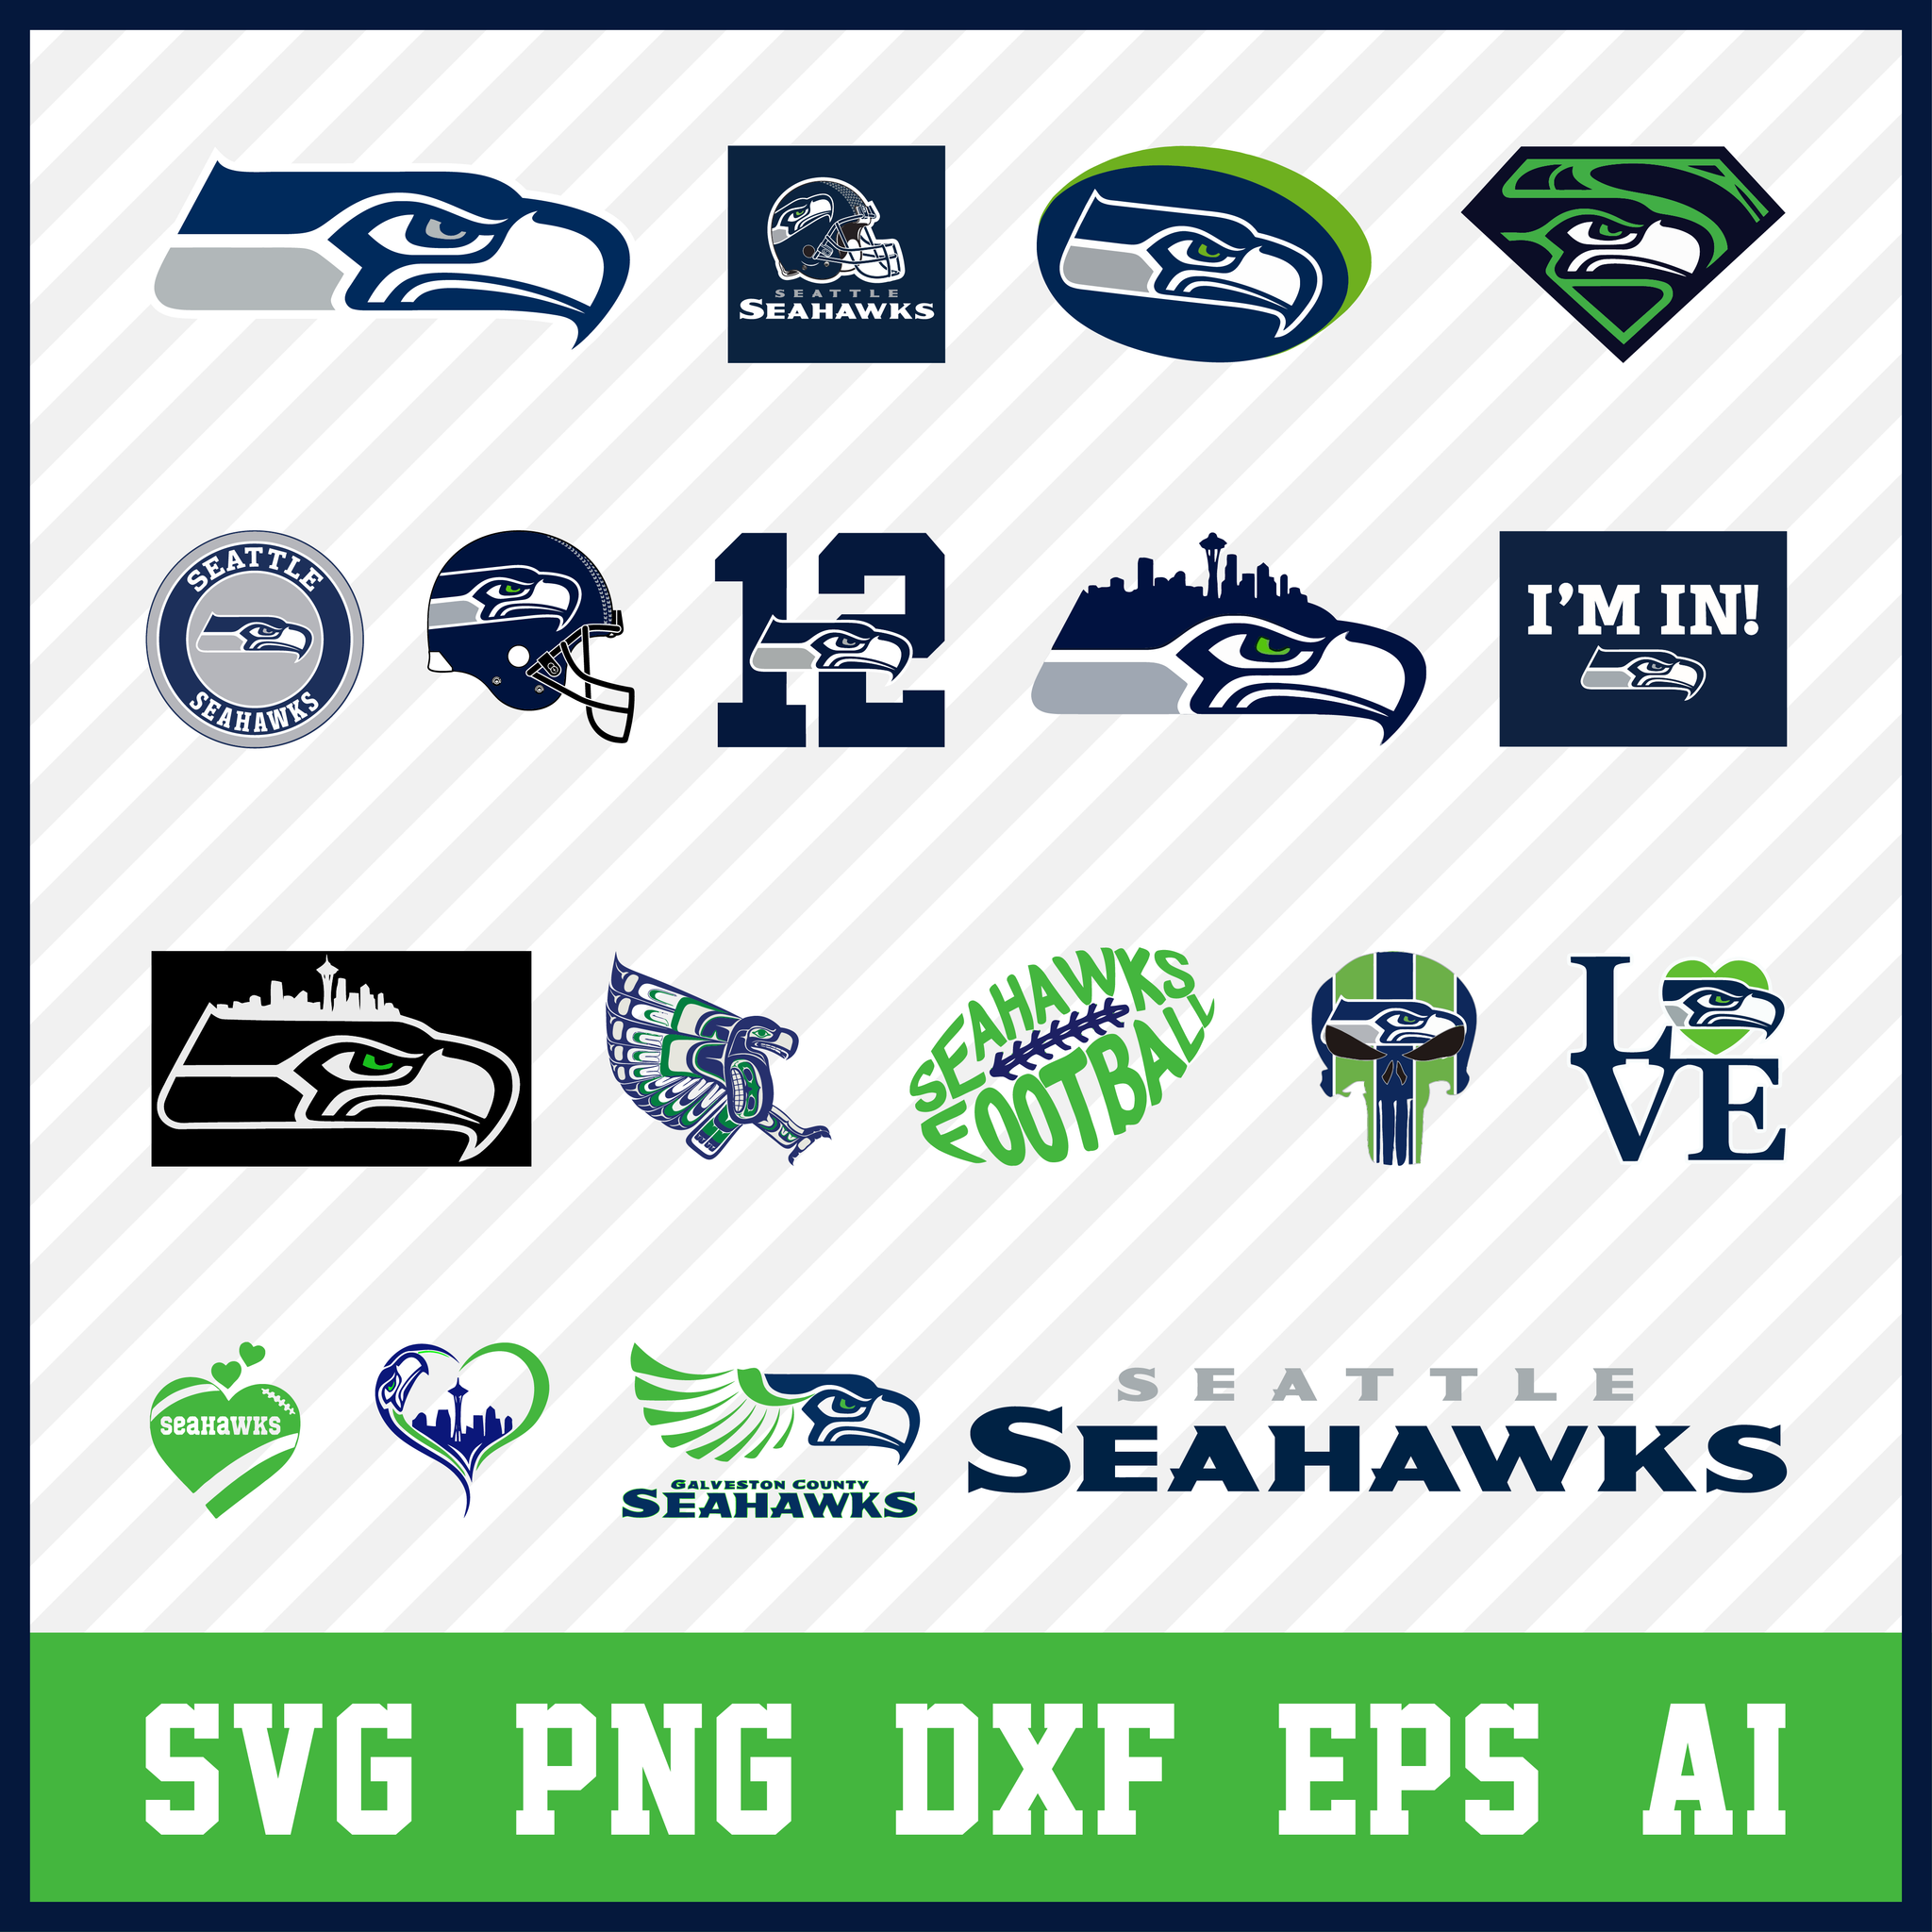 Seattle Seahawks Svg Bundle, Seahawks Svg, Seattle Seahawks Logo, Seahawks Clipart, Football SVG bundle, Svg File for cricut, Nfl Svg  • INSTANT Digital DOWNLOAD includes: 1 Zip and the following file formats: SVG, DXF, PNG, EPS, PDF  • Artwork files are perfect for printing, resizing, coloring and modifying with the appropriate software.